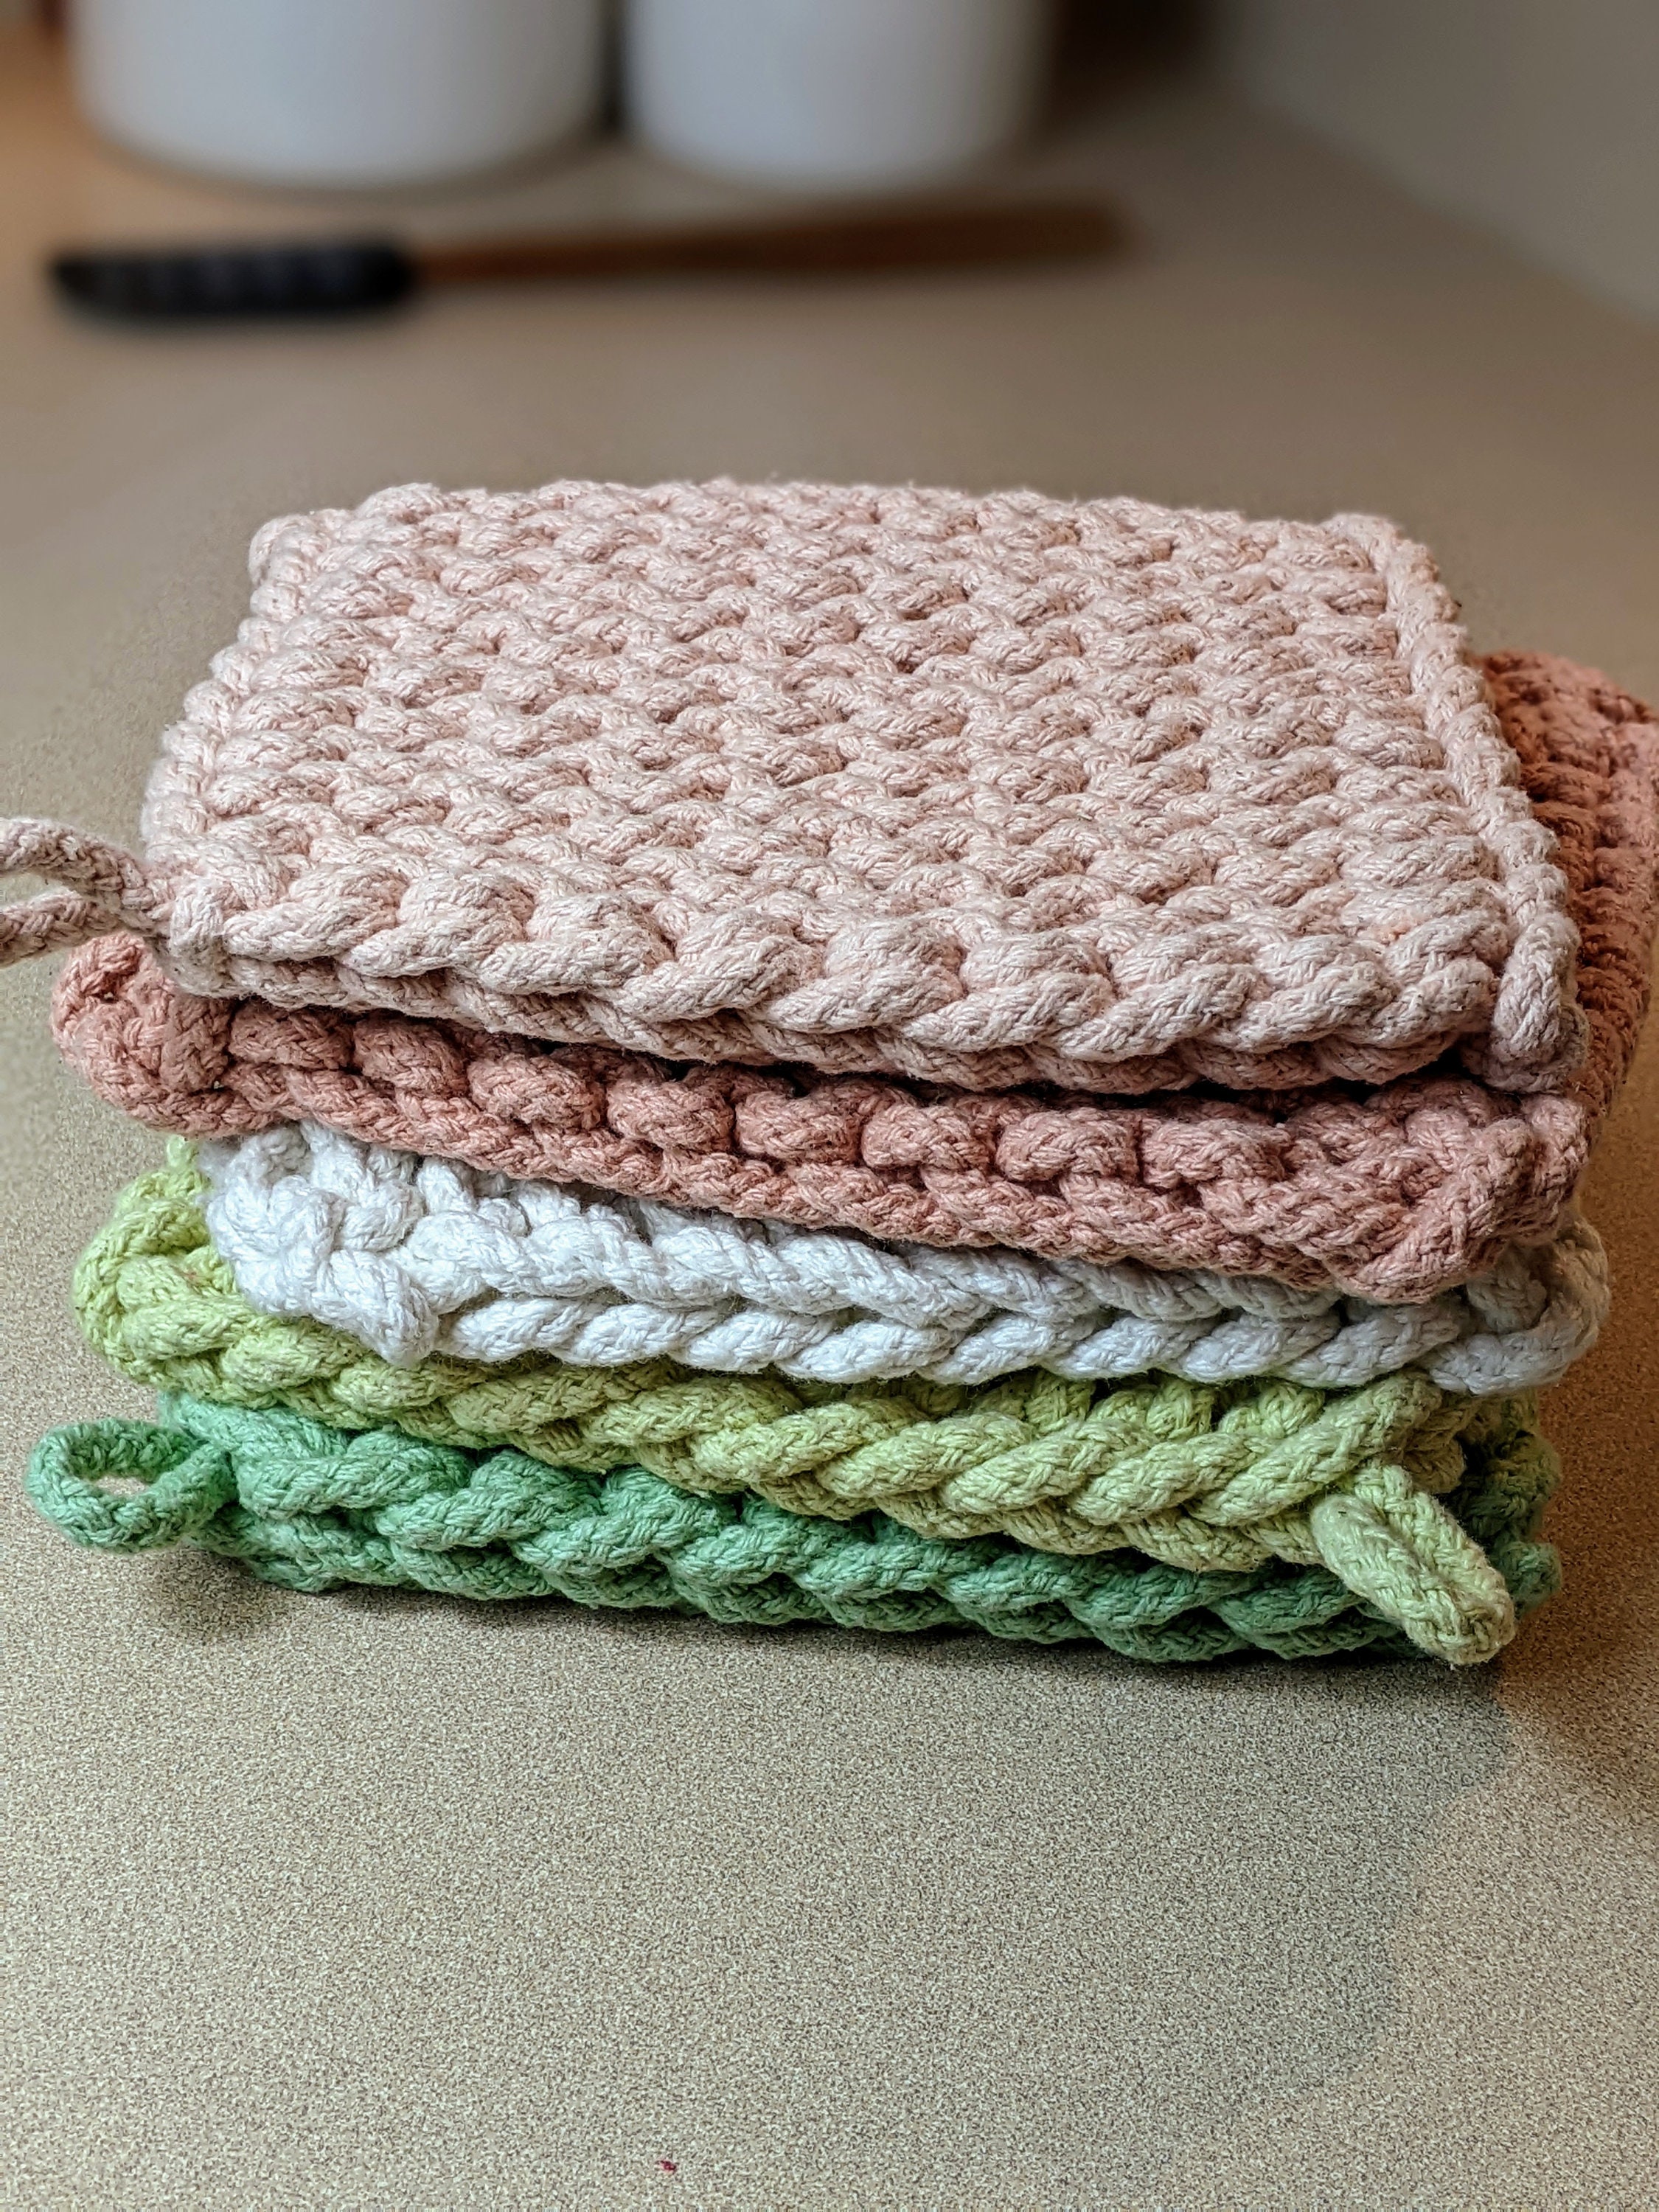  Creative Co-Op Square Cotton Crocheted Potholders/Hot Pads (Set  of 4 Colors) Pot Holders, Multicolor, 4 Count : Home & Kitchen